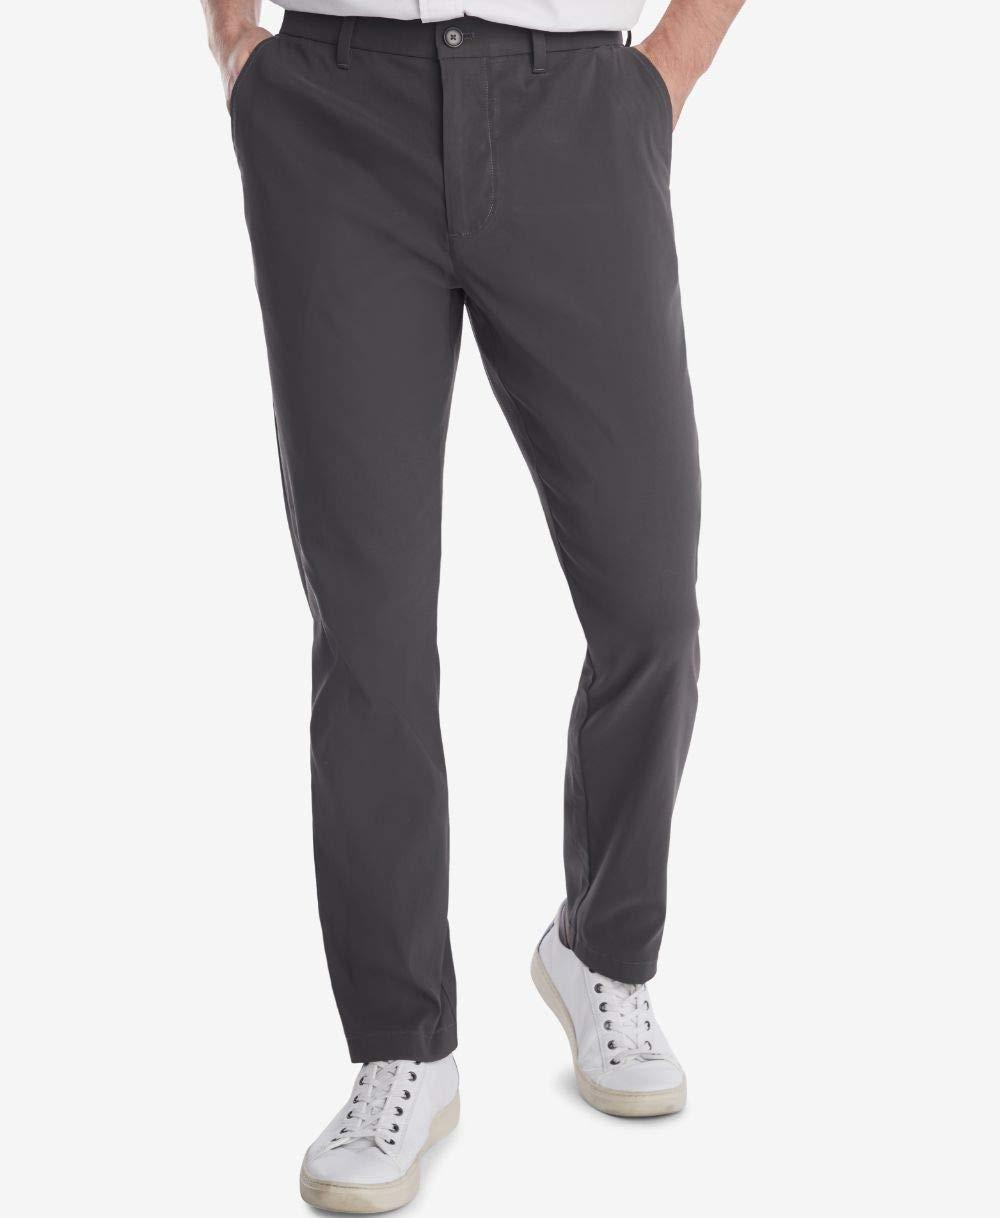 Tommy Hilfiger Sport Tech Chino Pants in Dark Ash (Gray) for Men - Save ...